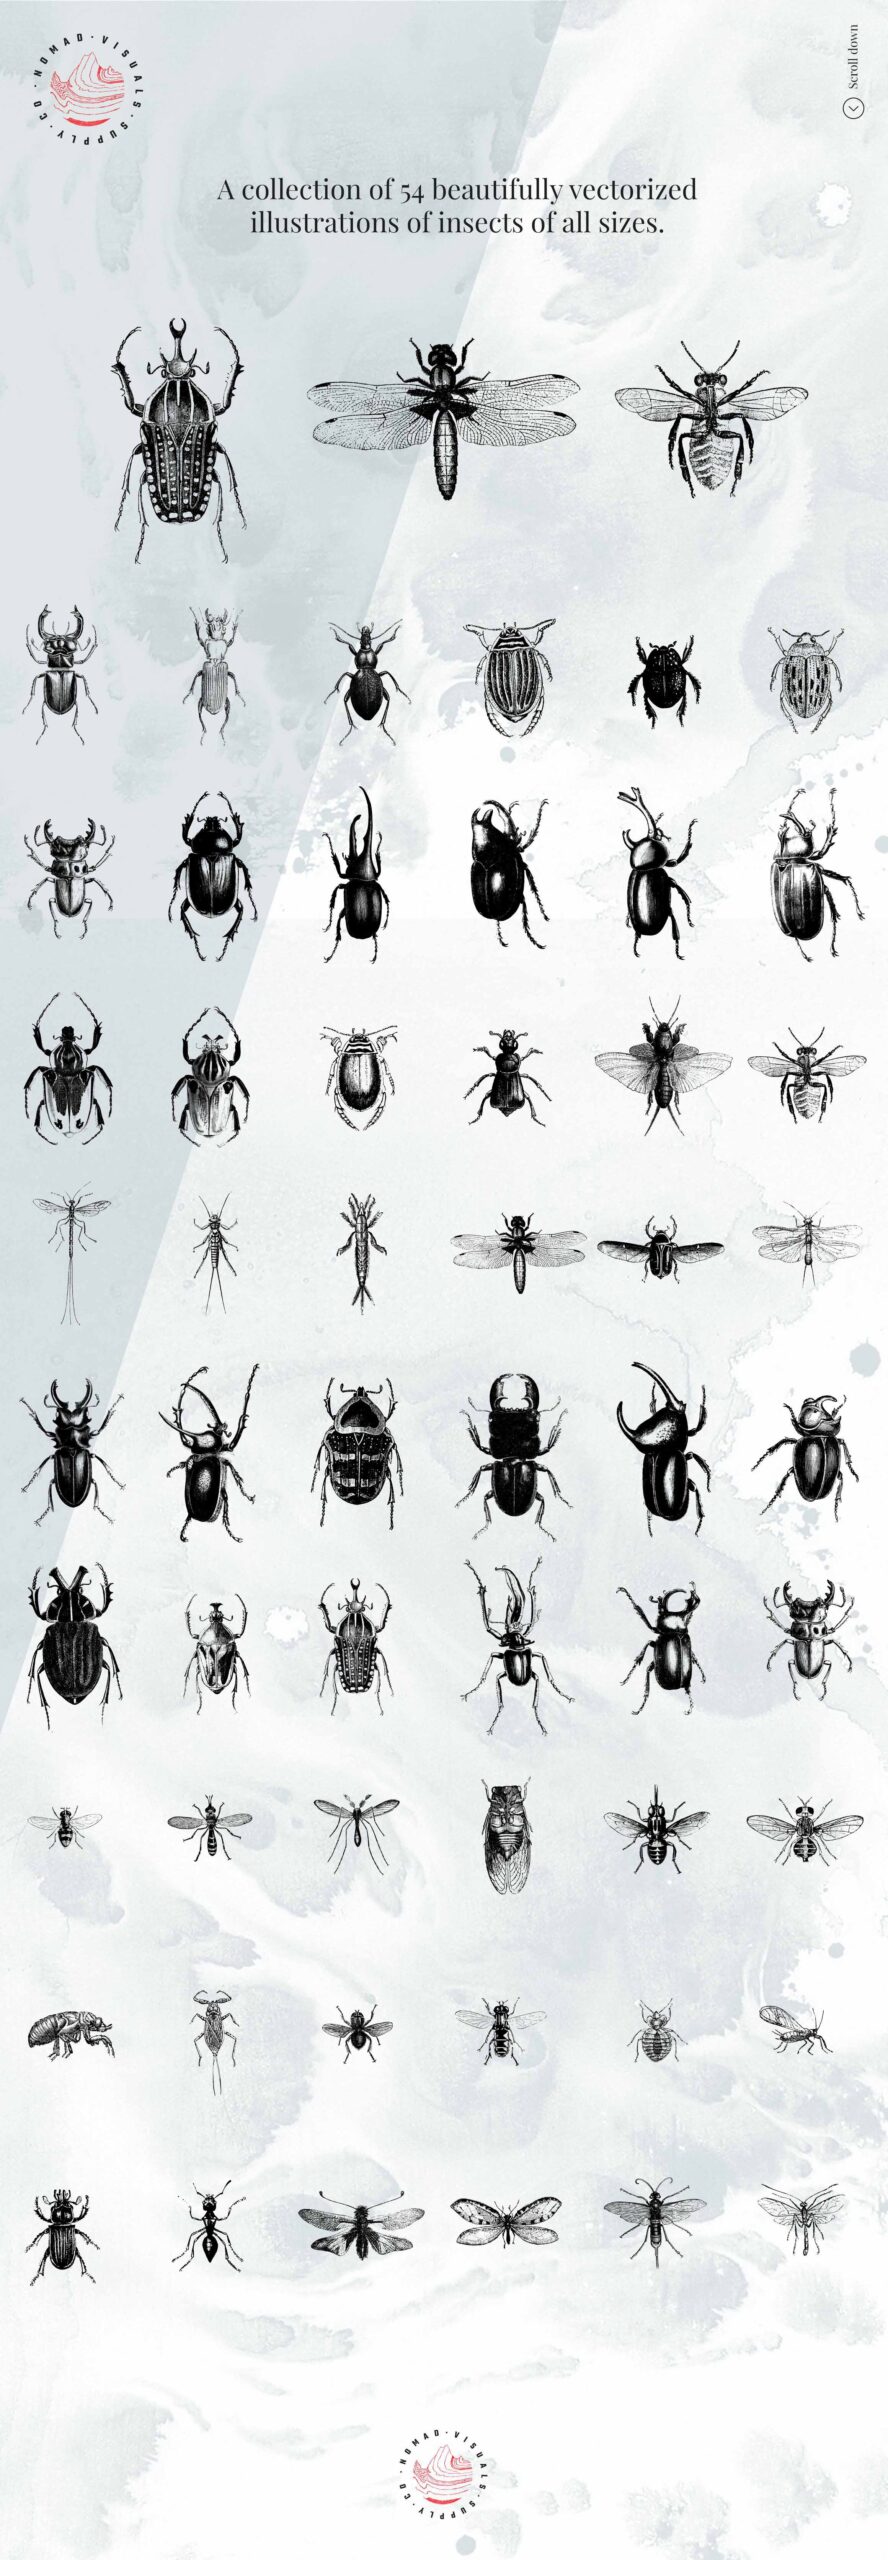 Insects Illustrations Presentation pres ()